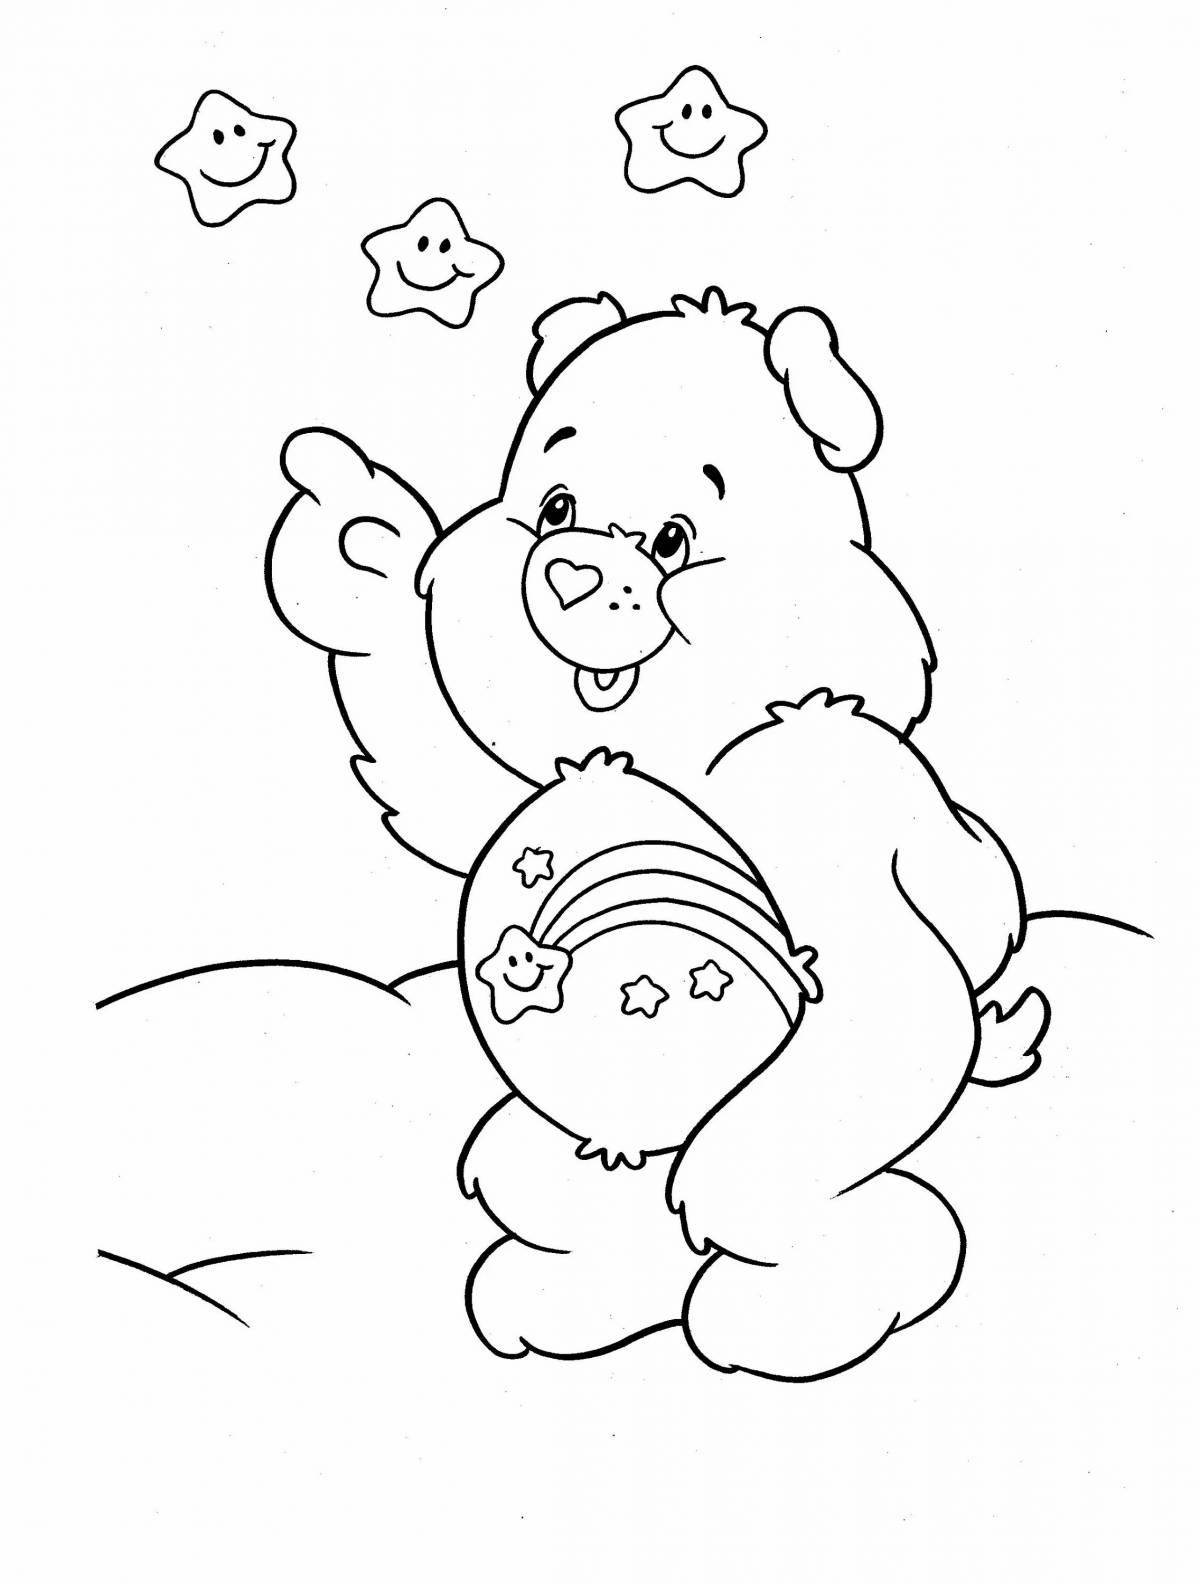 Coloring page cute and fluffy teddy bear